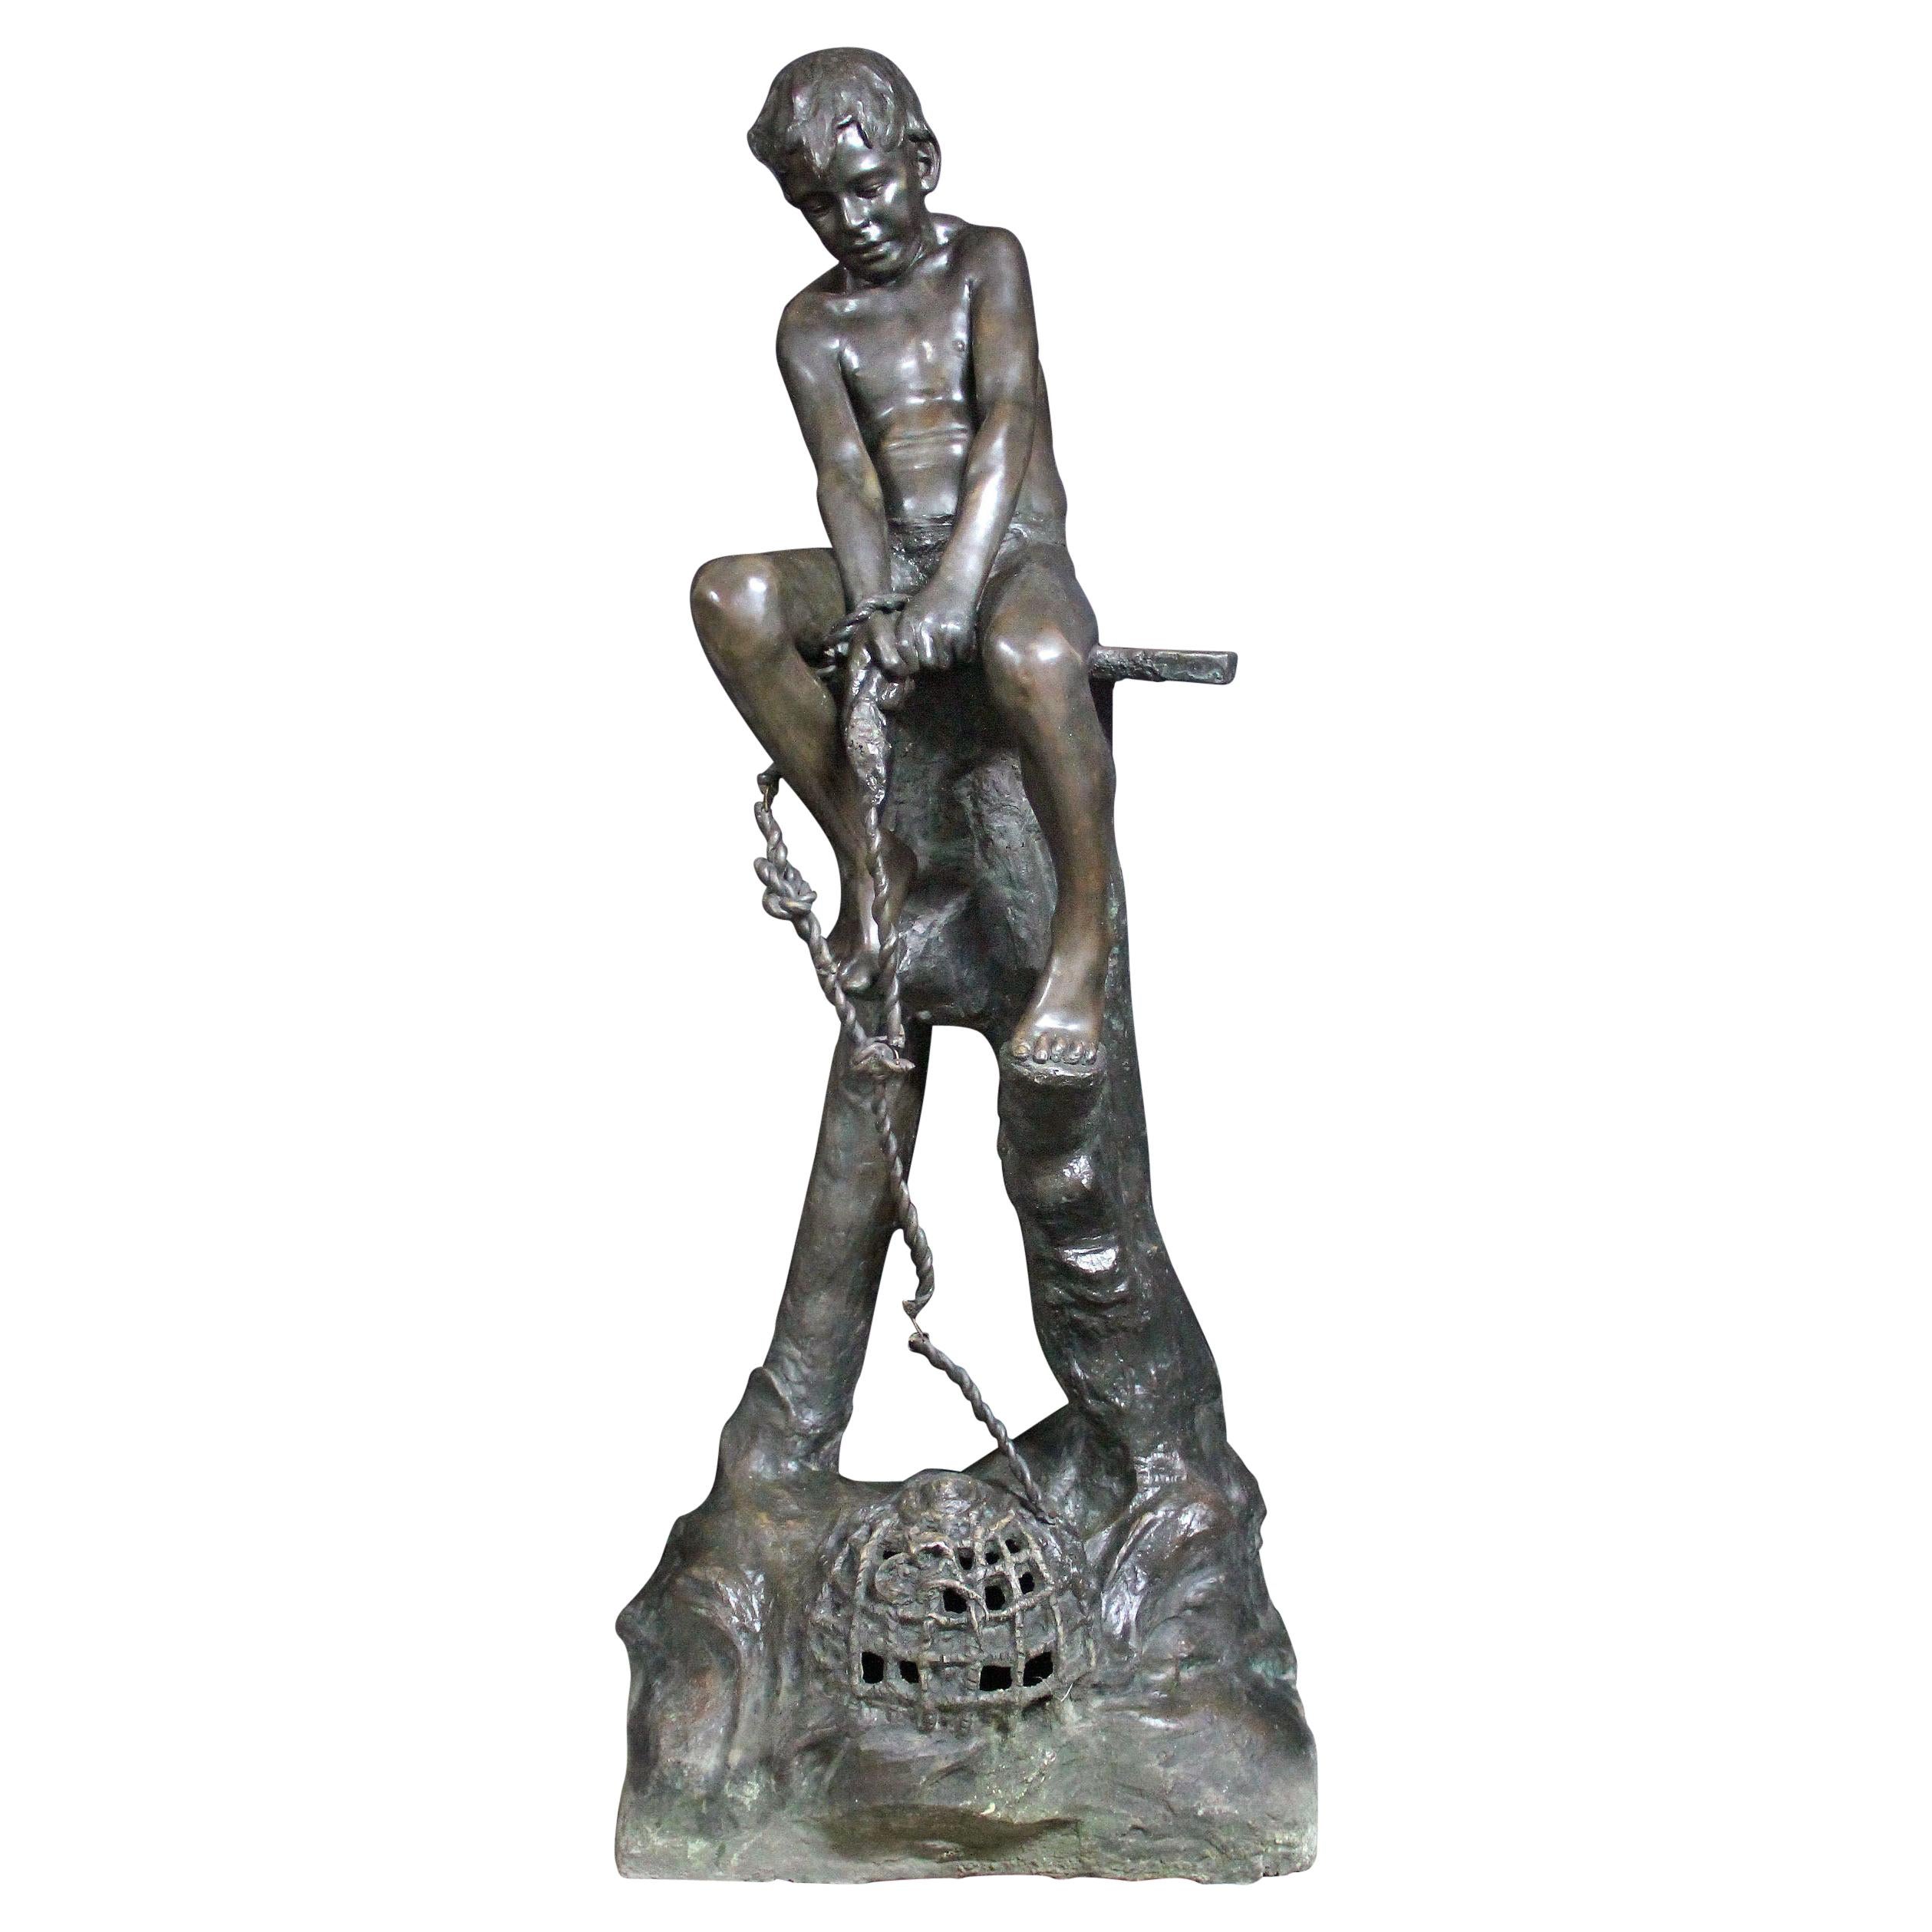 Exceptional Early 20th Century Life Size Bronze Sculpture by Raffaele Marino